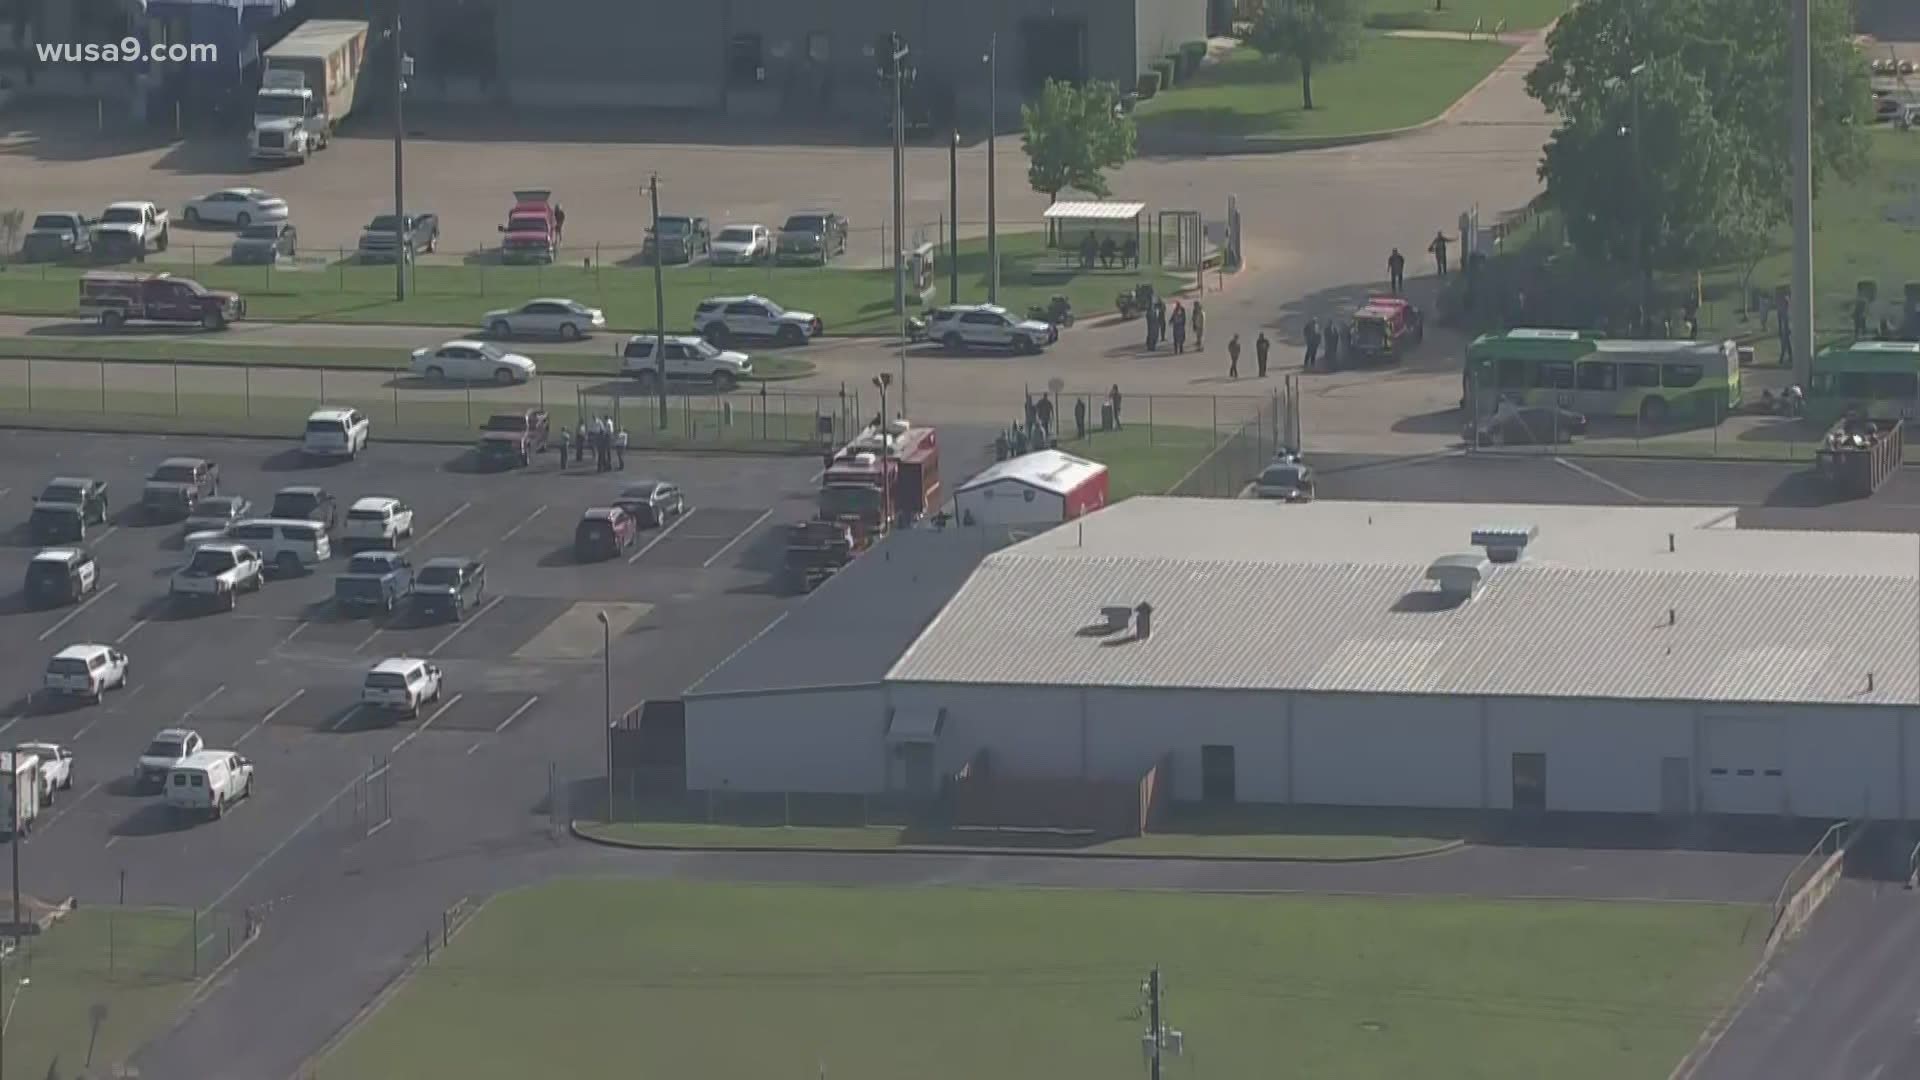 The shooting reportedly happened at Kent Moore Cabinets just before 2:30 p.m.